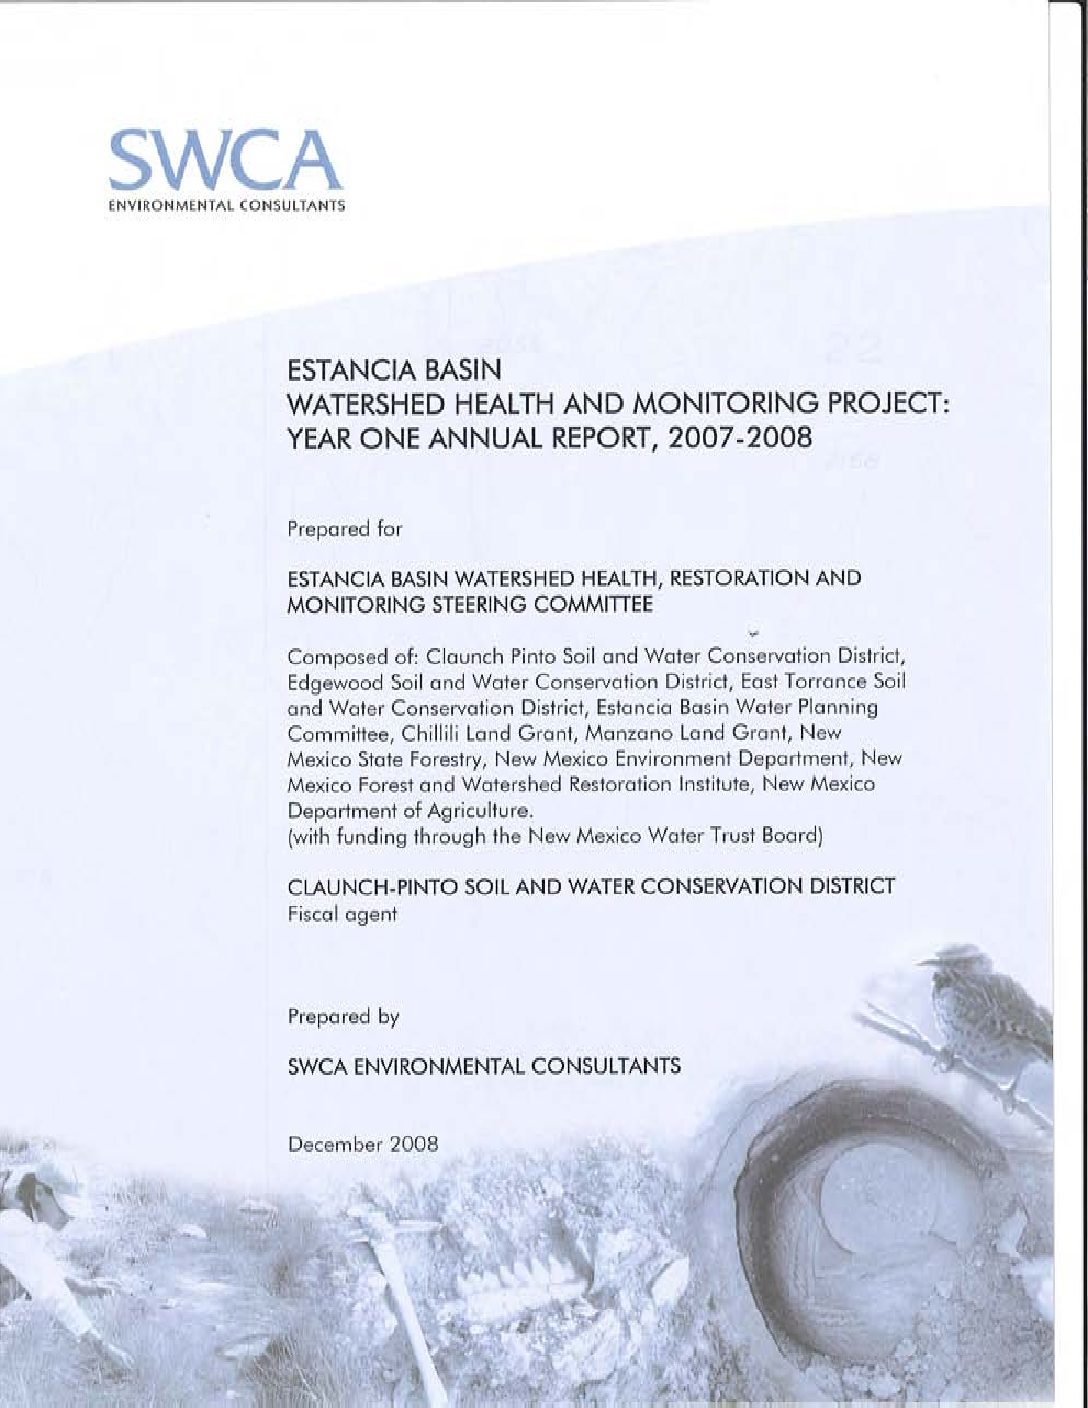 Estancia Basin Watershed Health and Monitoring Project: Year One Annual Report, 2007-2008